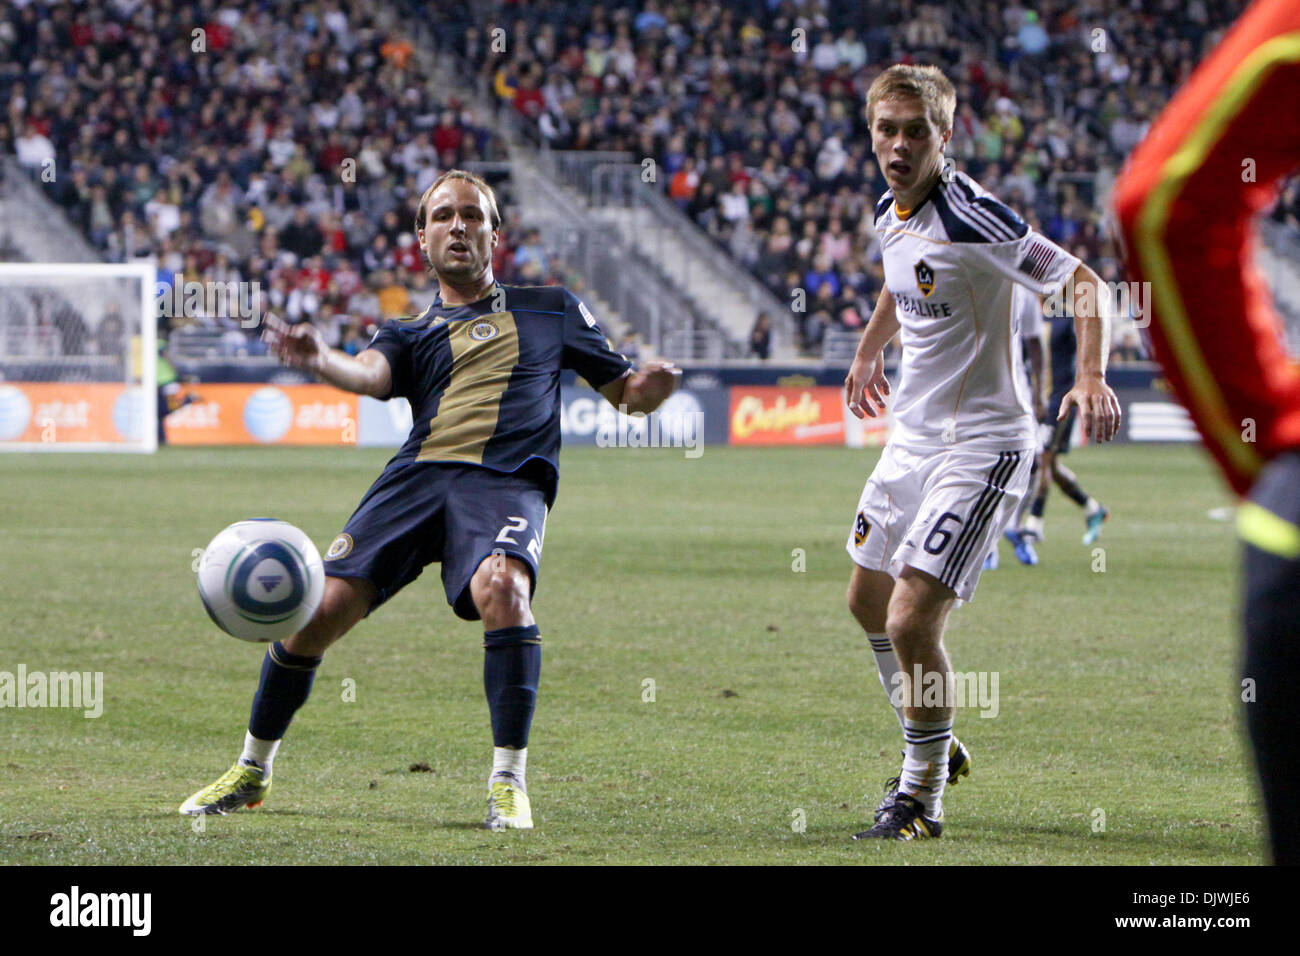 Oct. 7, 2010 - Chester, Pennsylvania, United States of America - Philadelphia Union midfielder Justin Mapp (#22) and Los Angeles Galaxy midfielder Eddie Lewis (#6) go after the ball during the match at PPL Park in Chester, PA. The Galaxy won 1-0. (Credit Image: © Kate McGovern/Southcreek Global/ZUMApress.com) Stock Photo